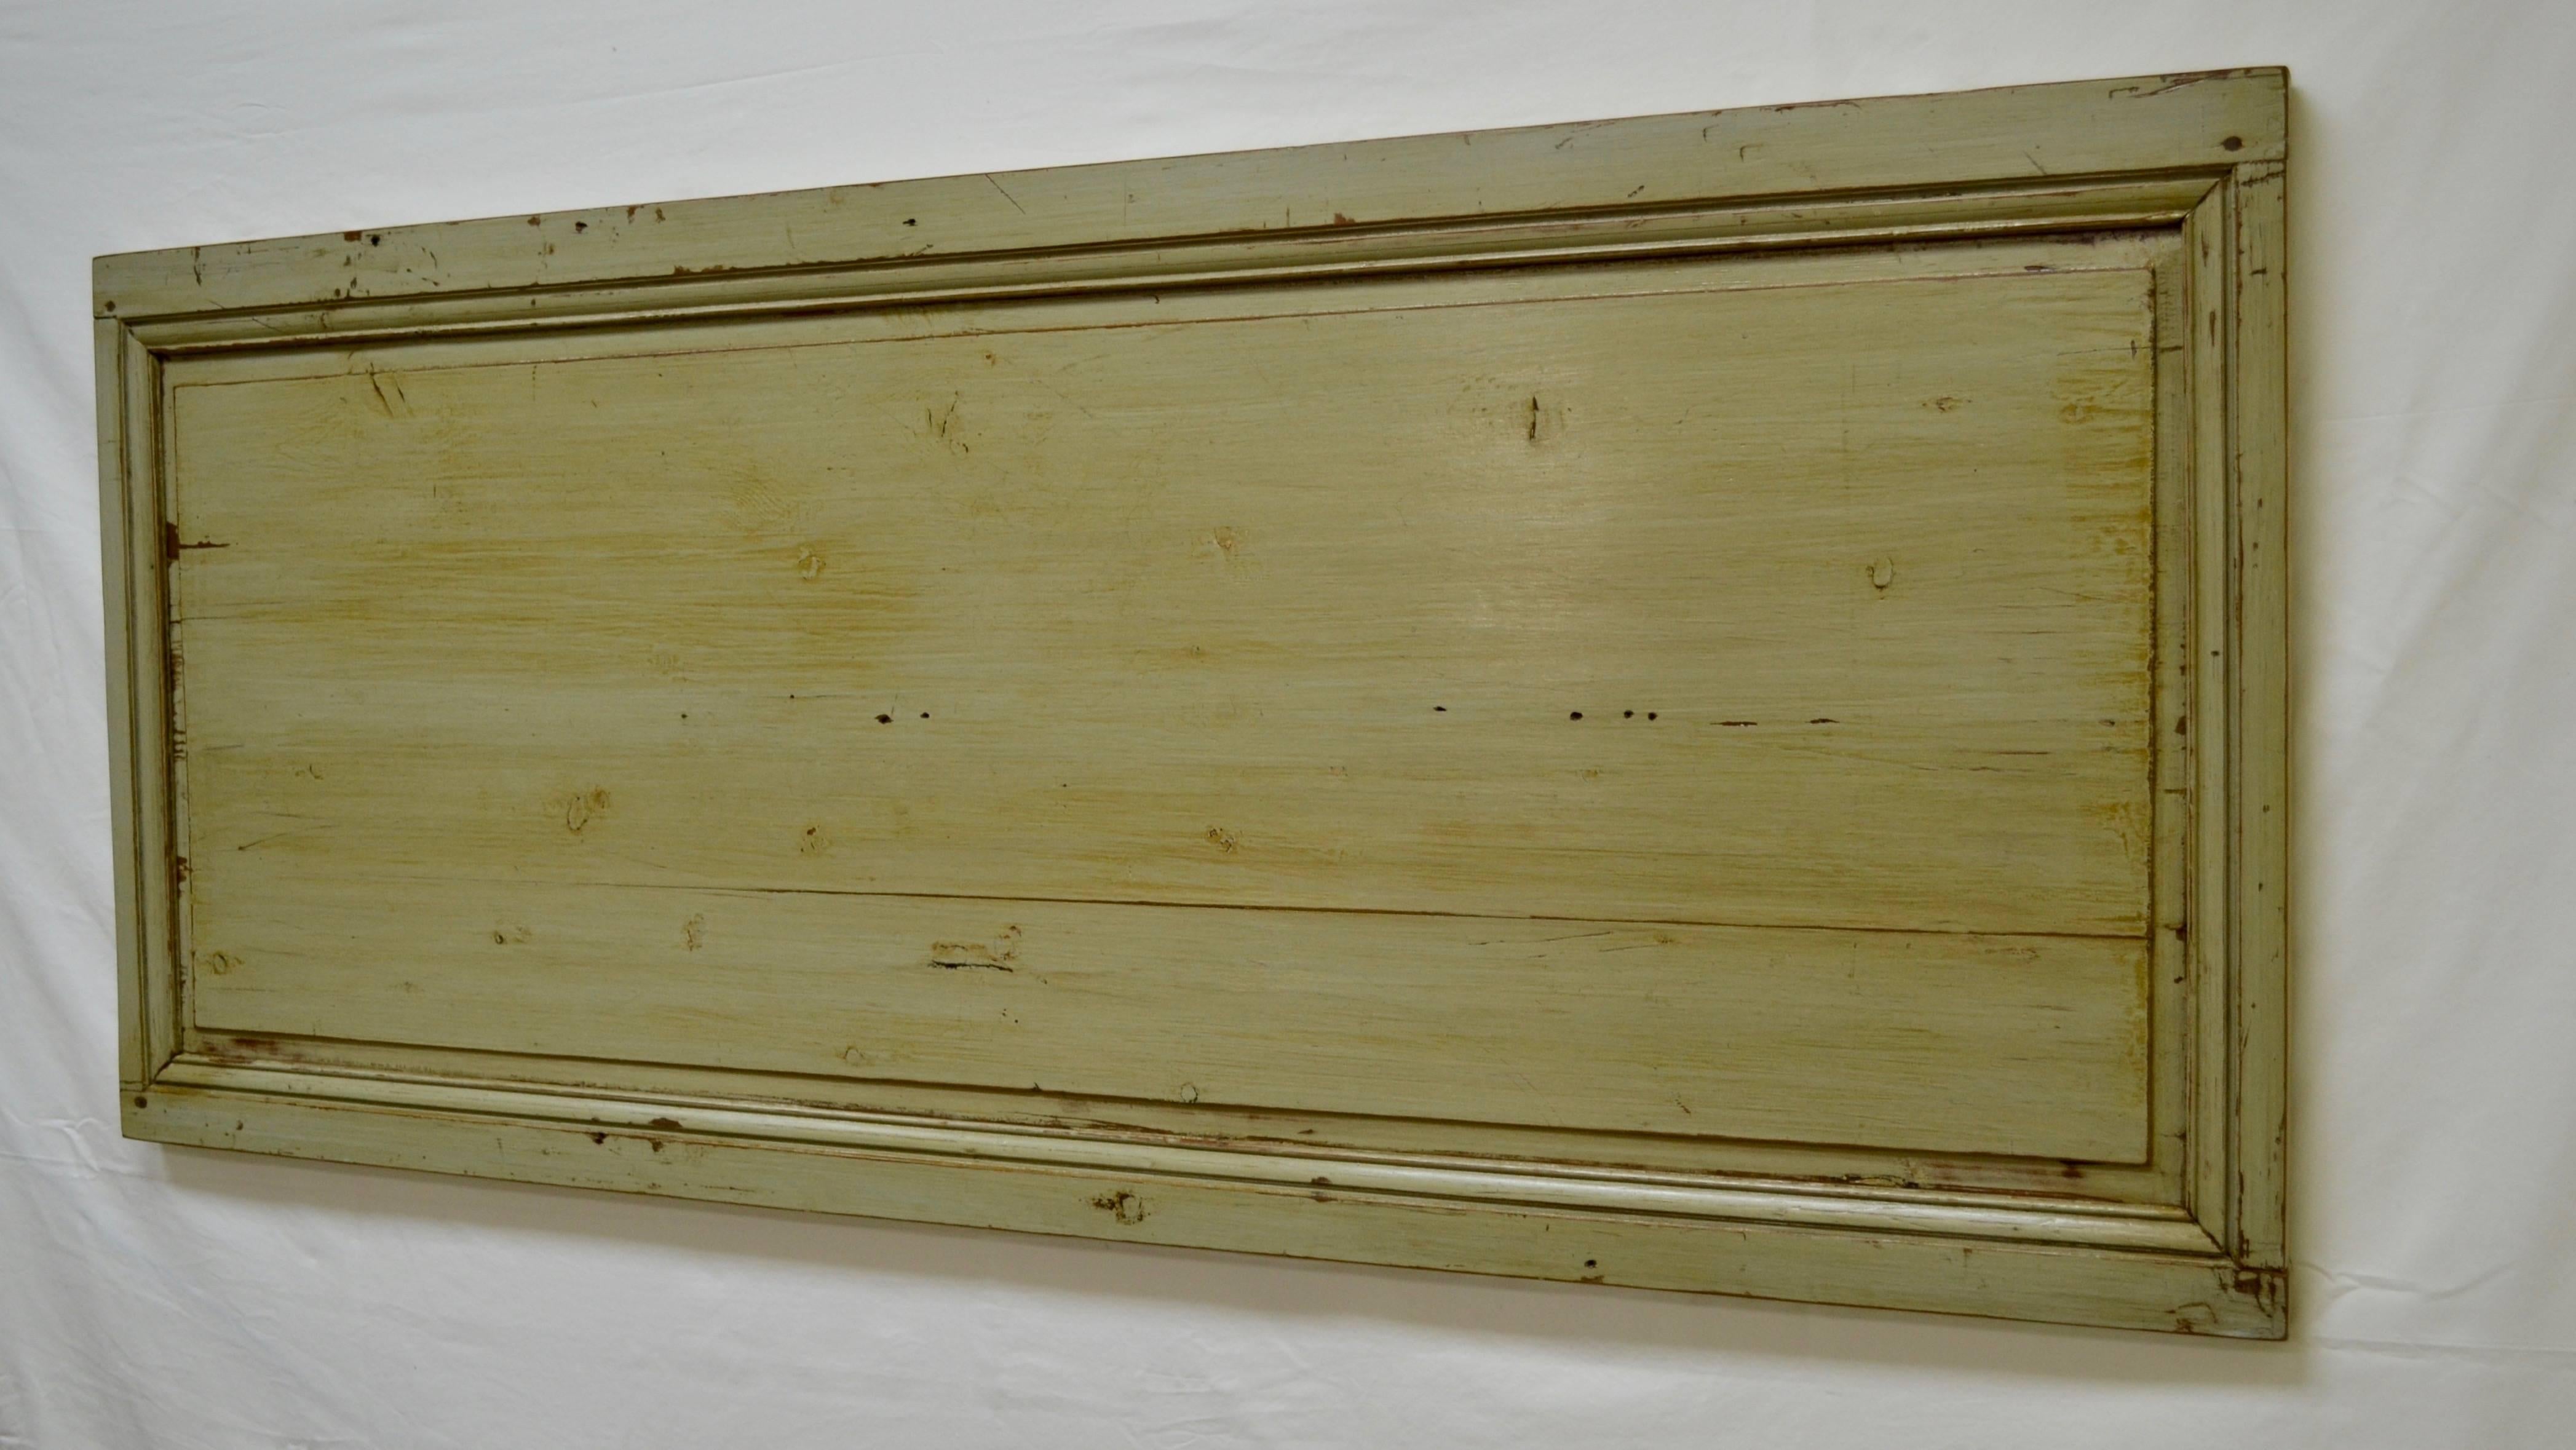 An old pine paneled room in France has yielded this beautifully-made framed raised panel, which we think looks great as a rustic queen-size headboard, mounted on the wall above the bed. This panel is 67.5” wide, allowing just a little overhang to